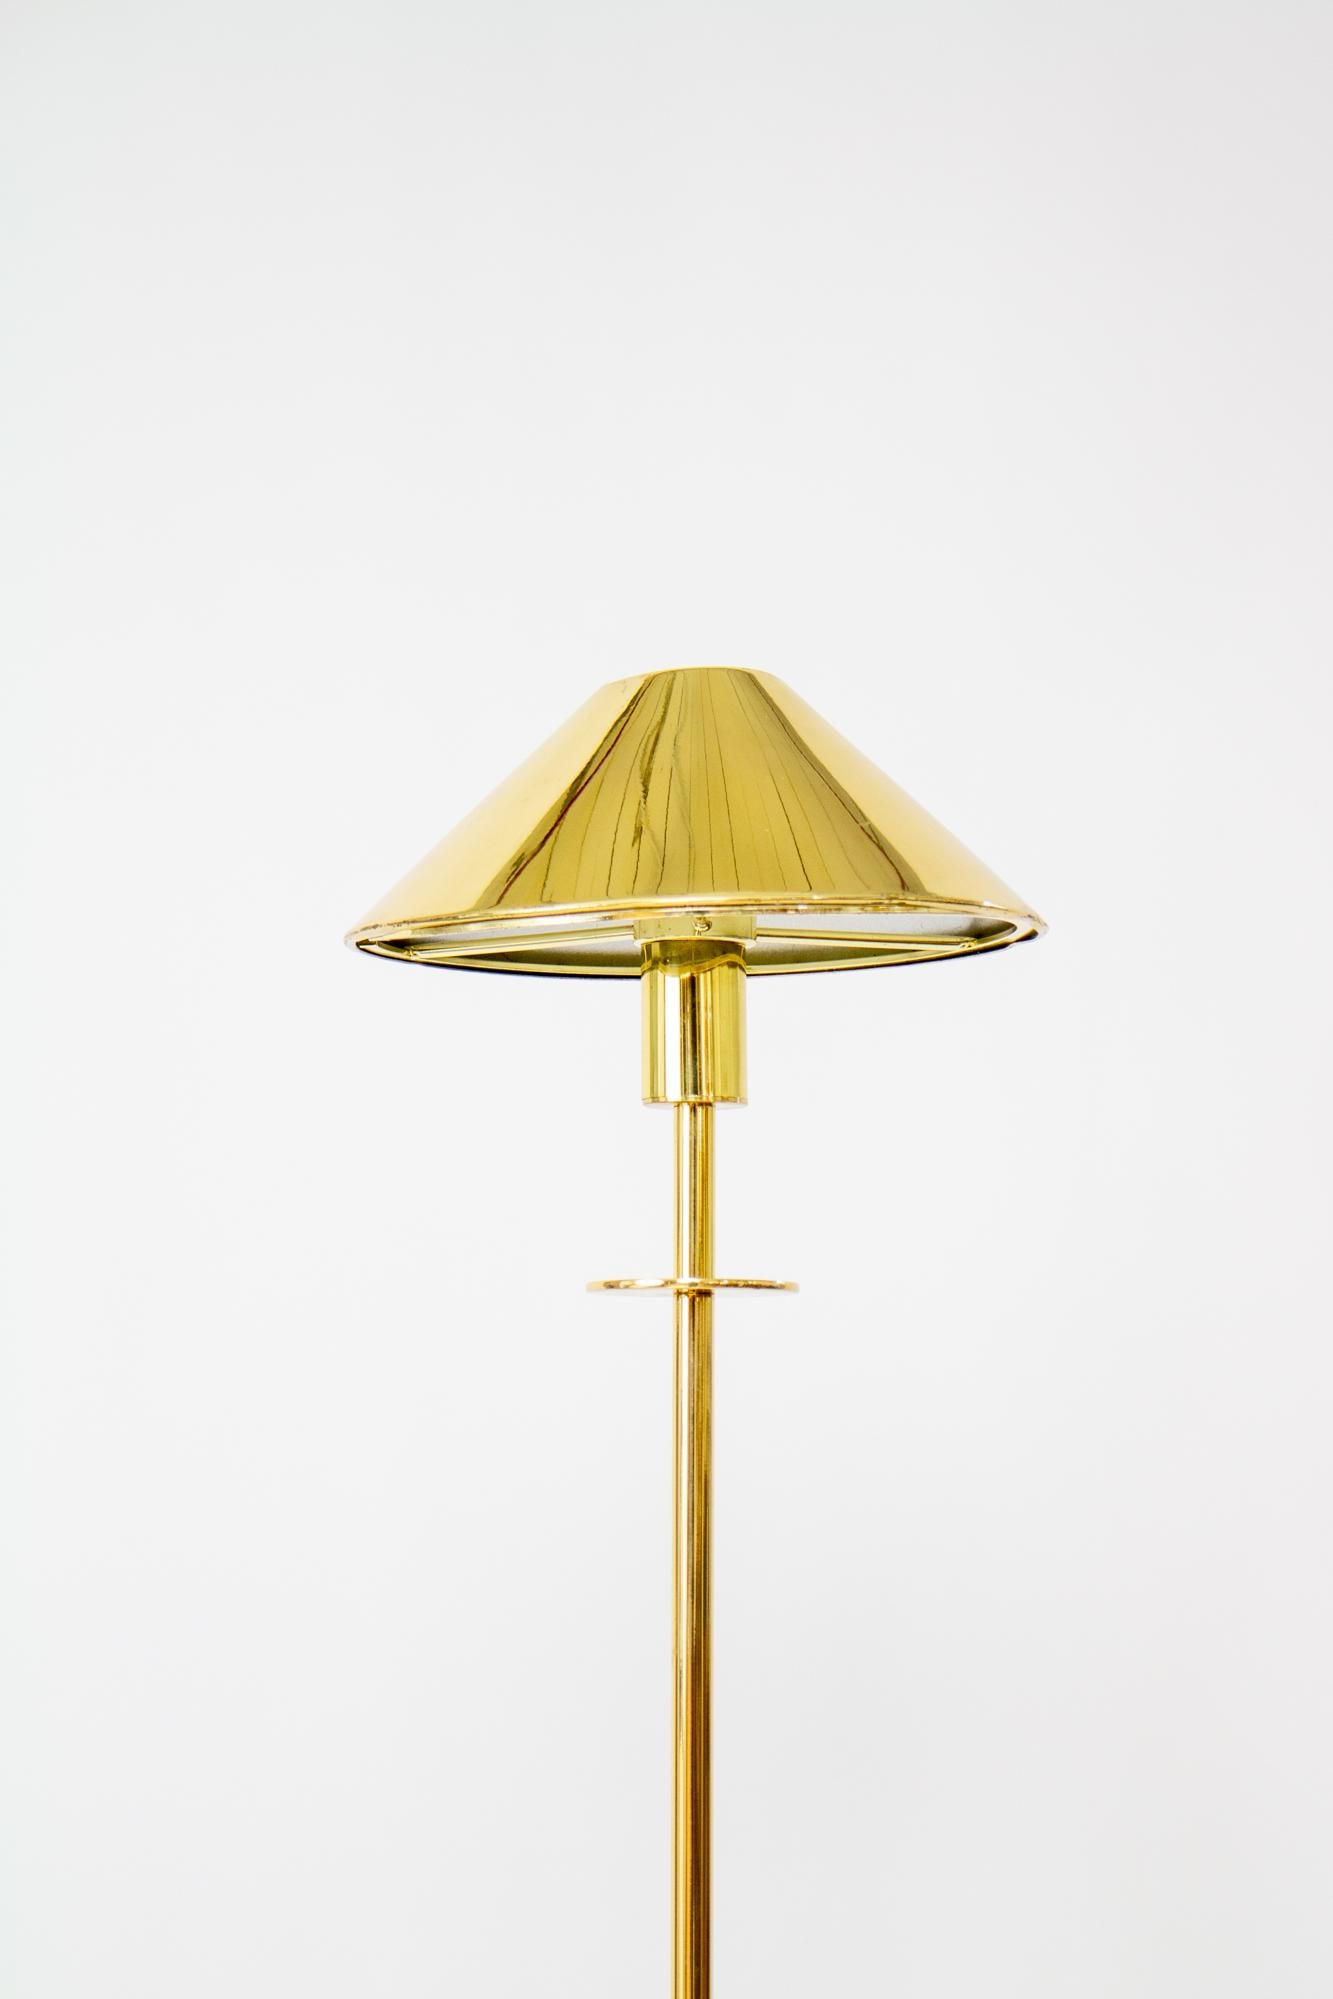 German Halogen Brass Floor Lamp from Holtkoetter Leuchten. Crafted with precision, the lamp features a handy dimming technology – a simple turn adjusts the lighting. In a polished brass with a sleek compact shade, it effortlessly adds modern